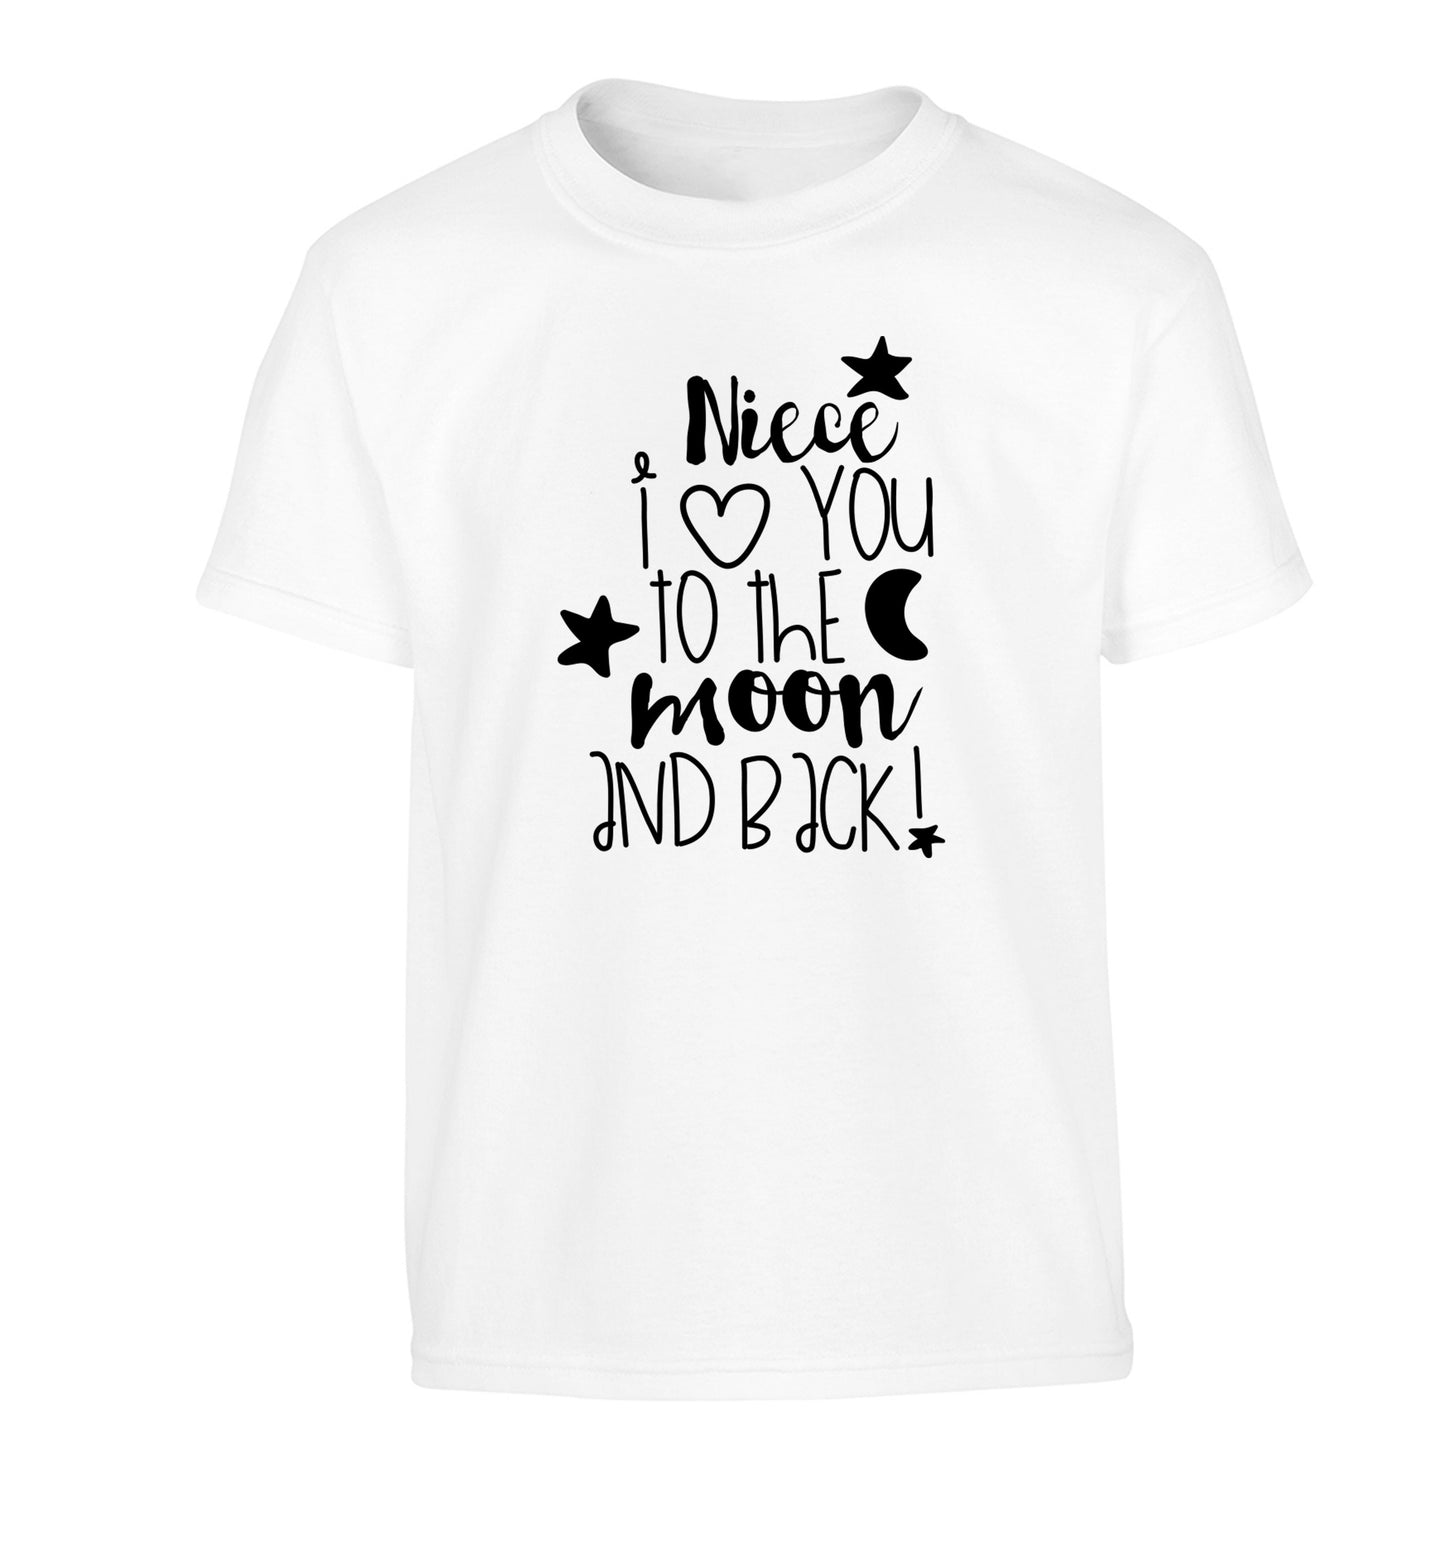 Niece I love you to the moon and back Children's white Tshirt 12-14 Years